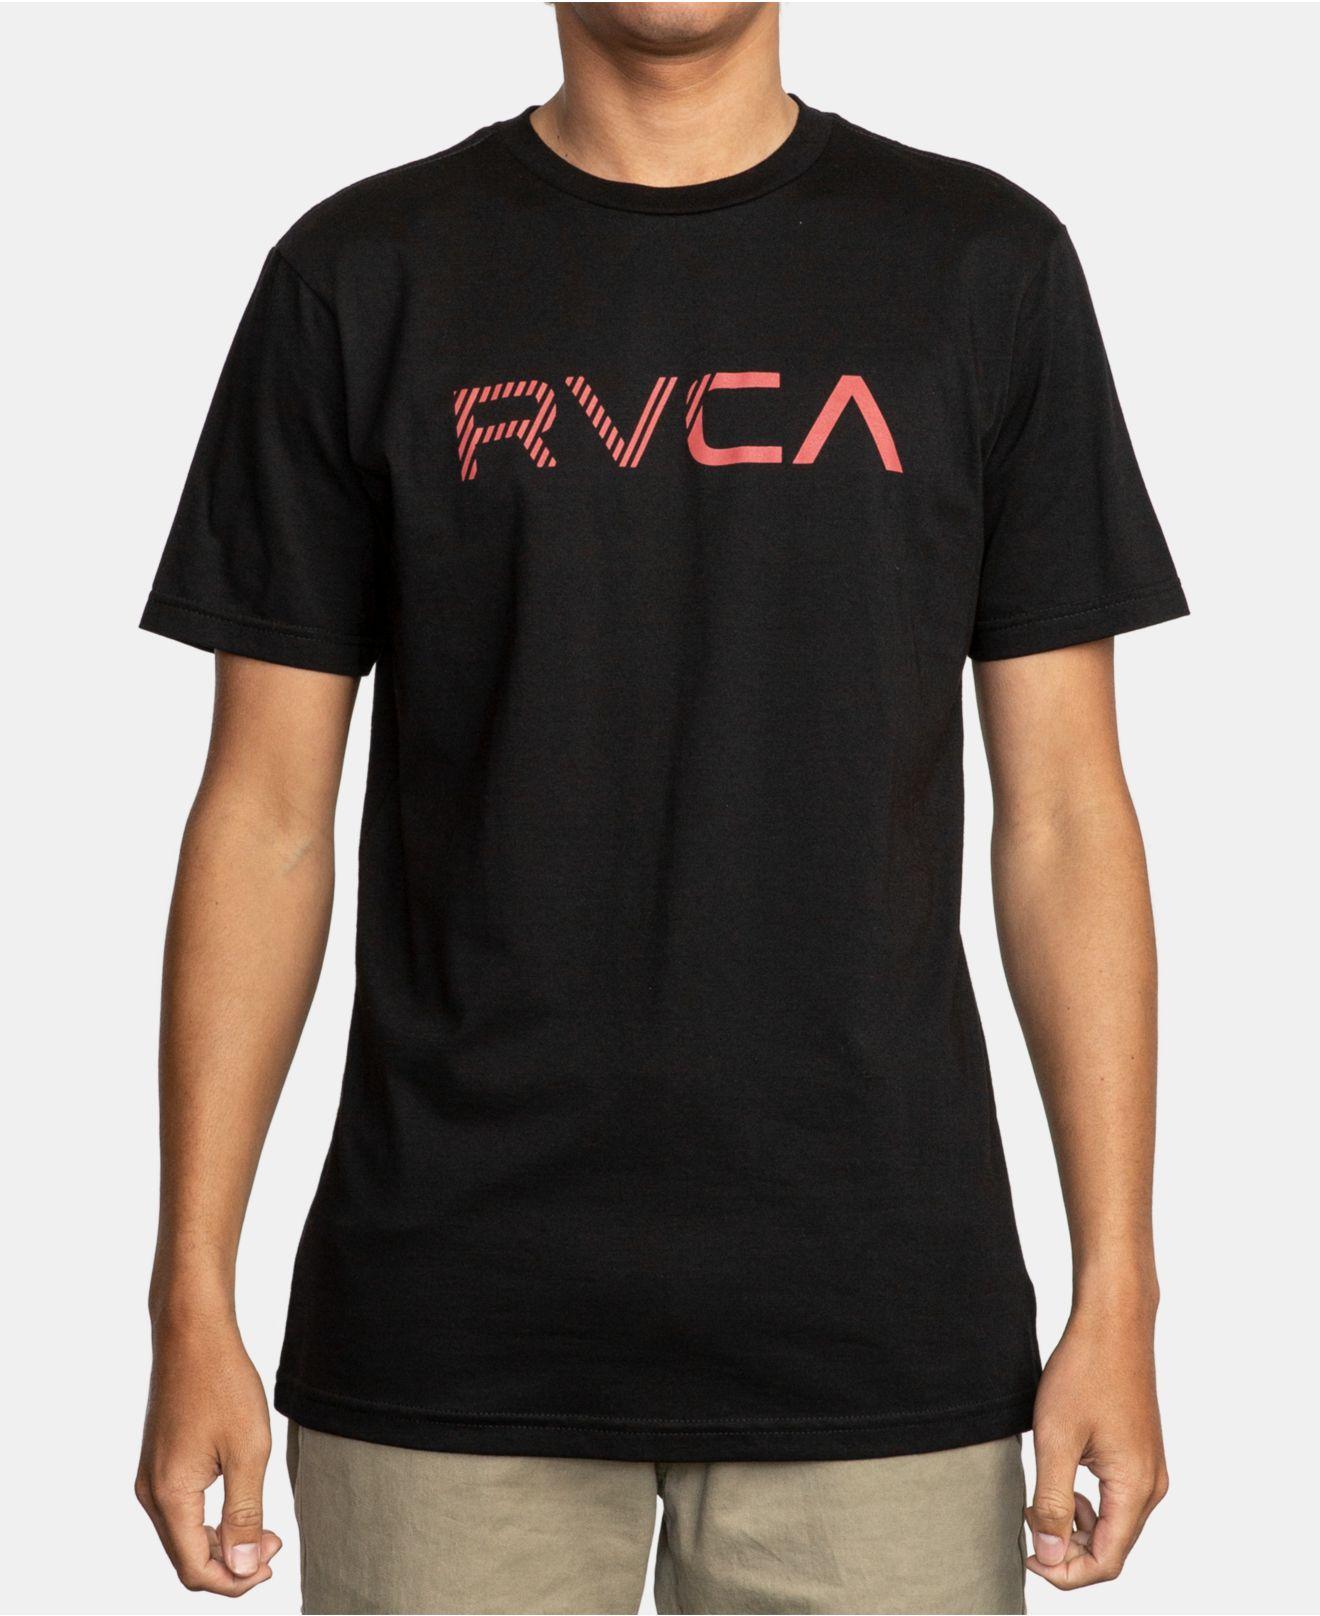 Lyst - RVCA Blinded Graphic T-shirt in Black for Men